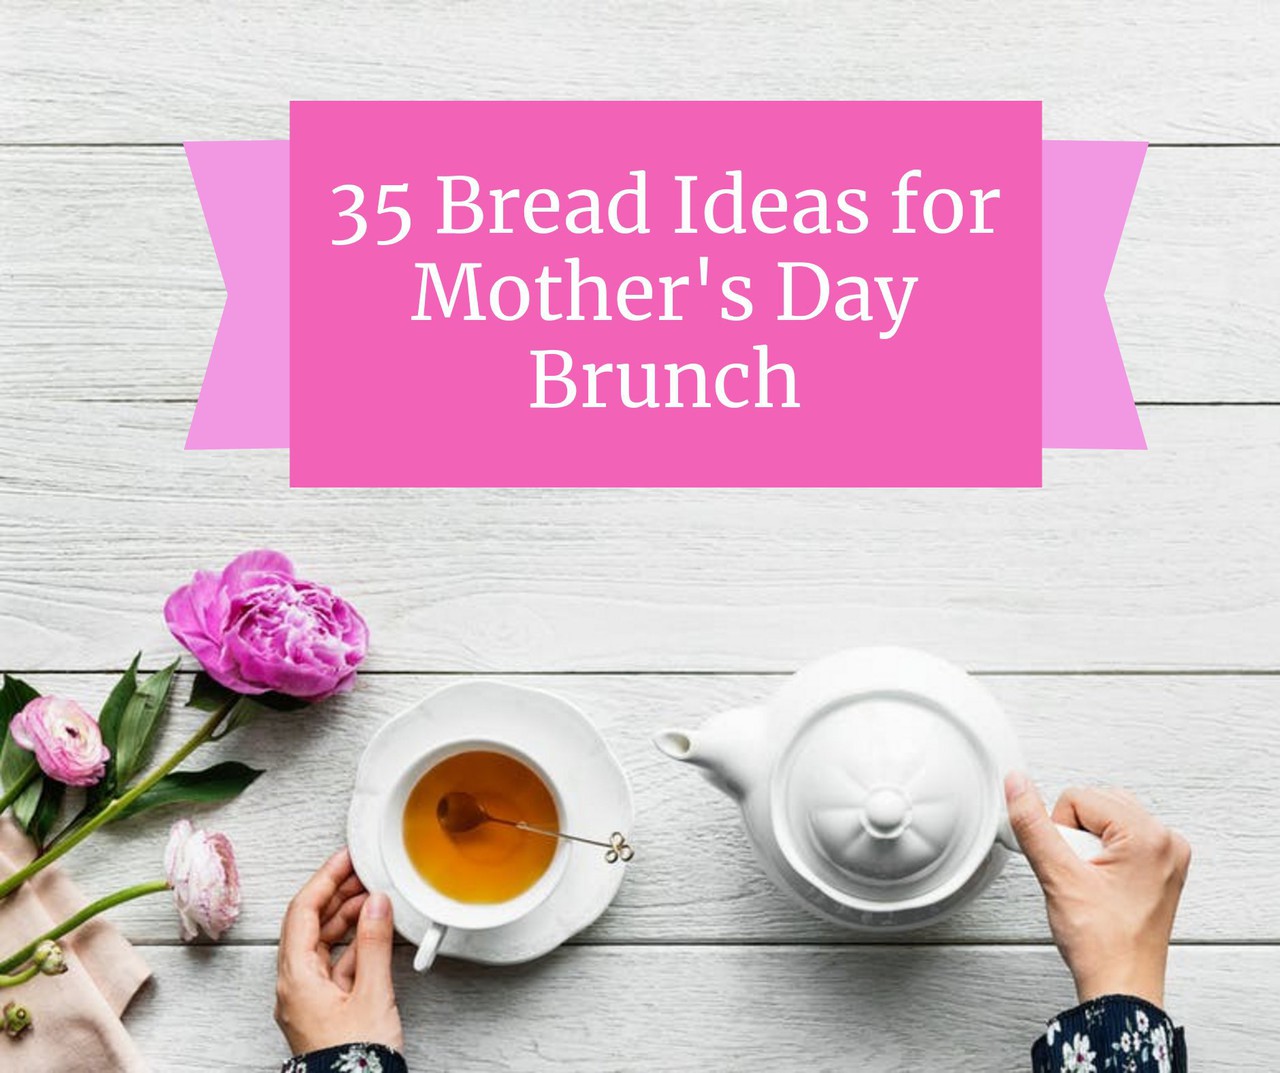 35 Bread Ideas for Mother's Day Brunch image